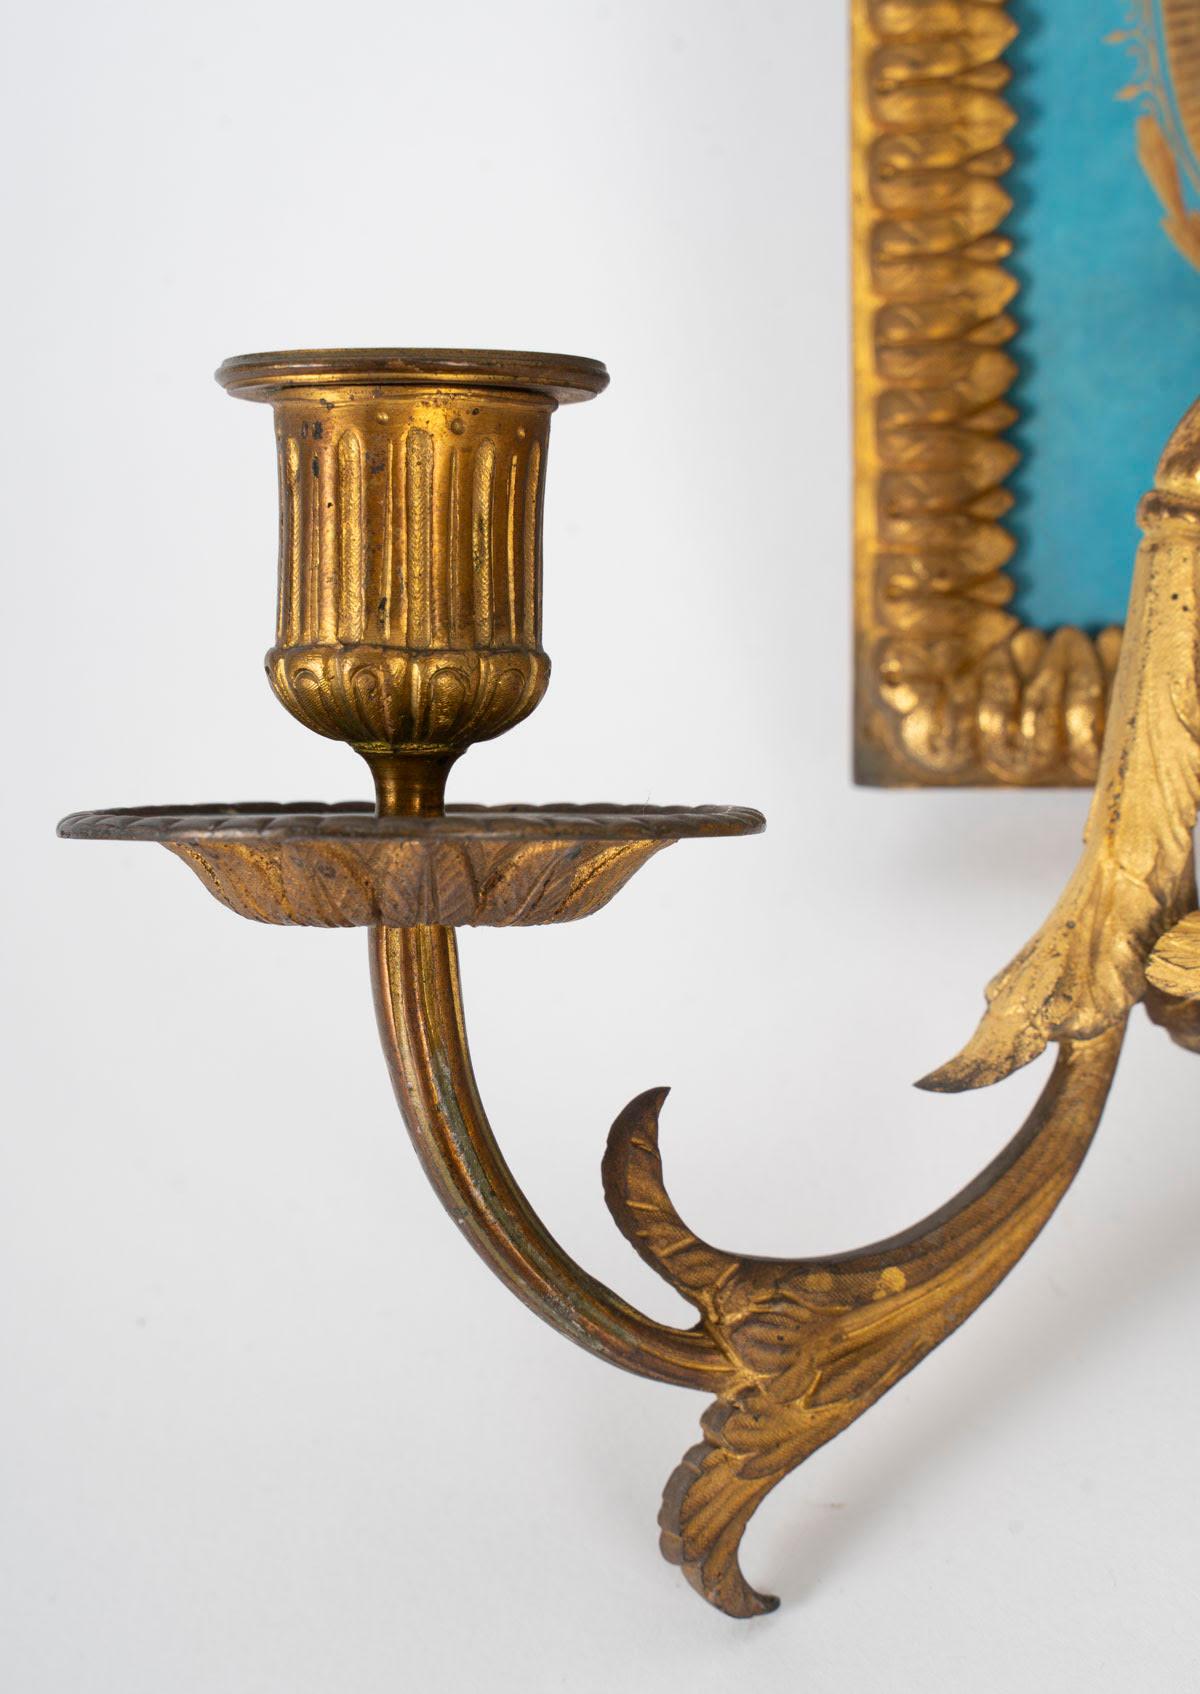 Pair of wall sconces in gilt bronze and Sèvres porcelain, 19th century, Napoleon III period.

Pair of Napoleon III period wall lights, 19th century, in gilt bronze and Sèvres porcelain, 2 candlesticks, possibility of electrification, painted